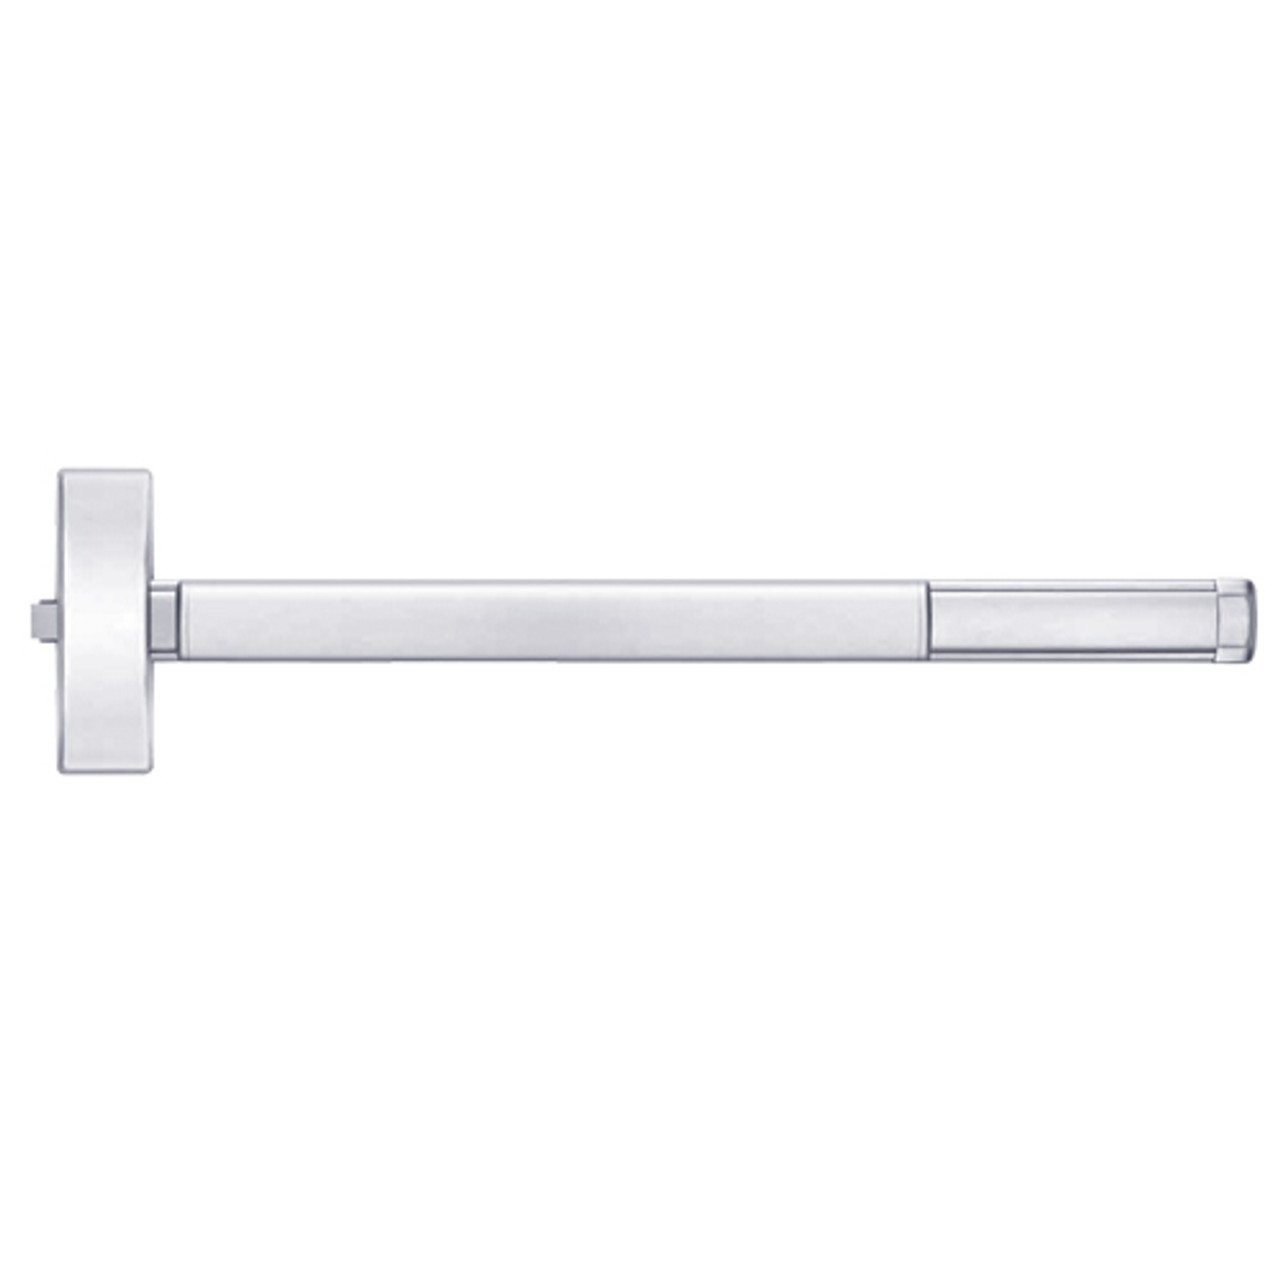 TSFL2105-625-48 PHI 2100 Series Fire Rated Apex Rim Exit Device with Touchbar Monitoring Switch Prepped for Key Controls Thumb Piece in Bright Chrome Finish